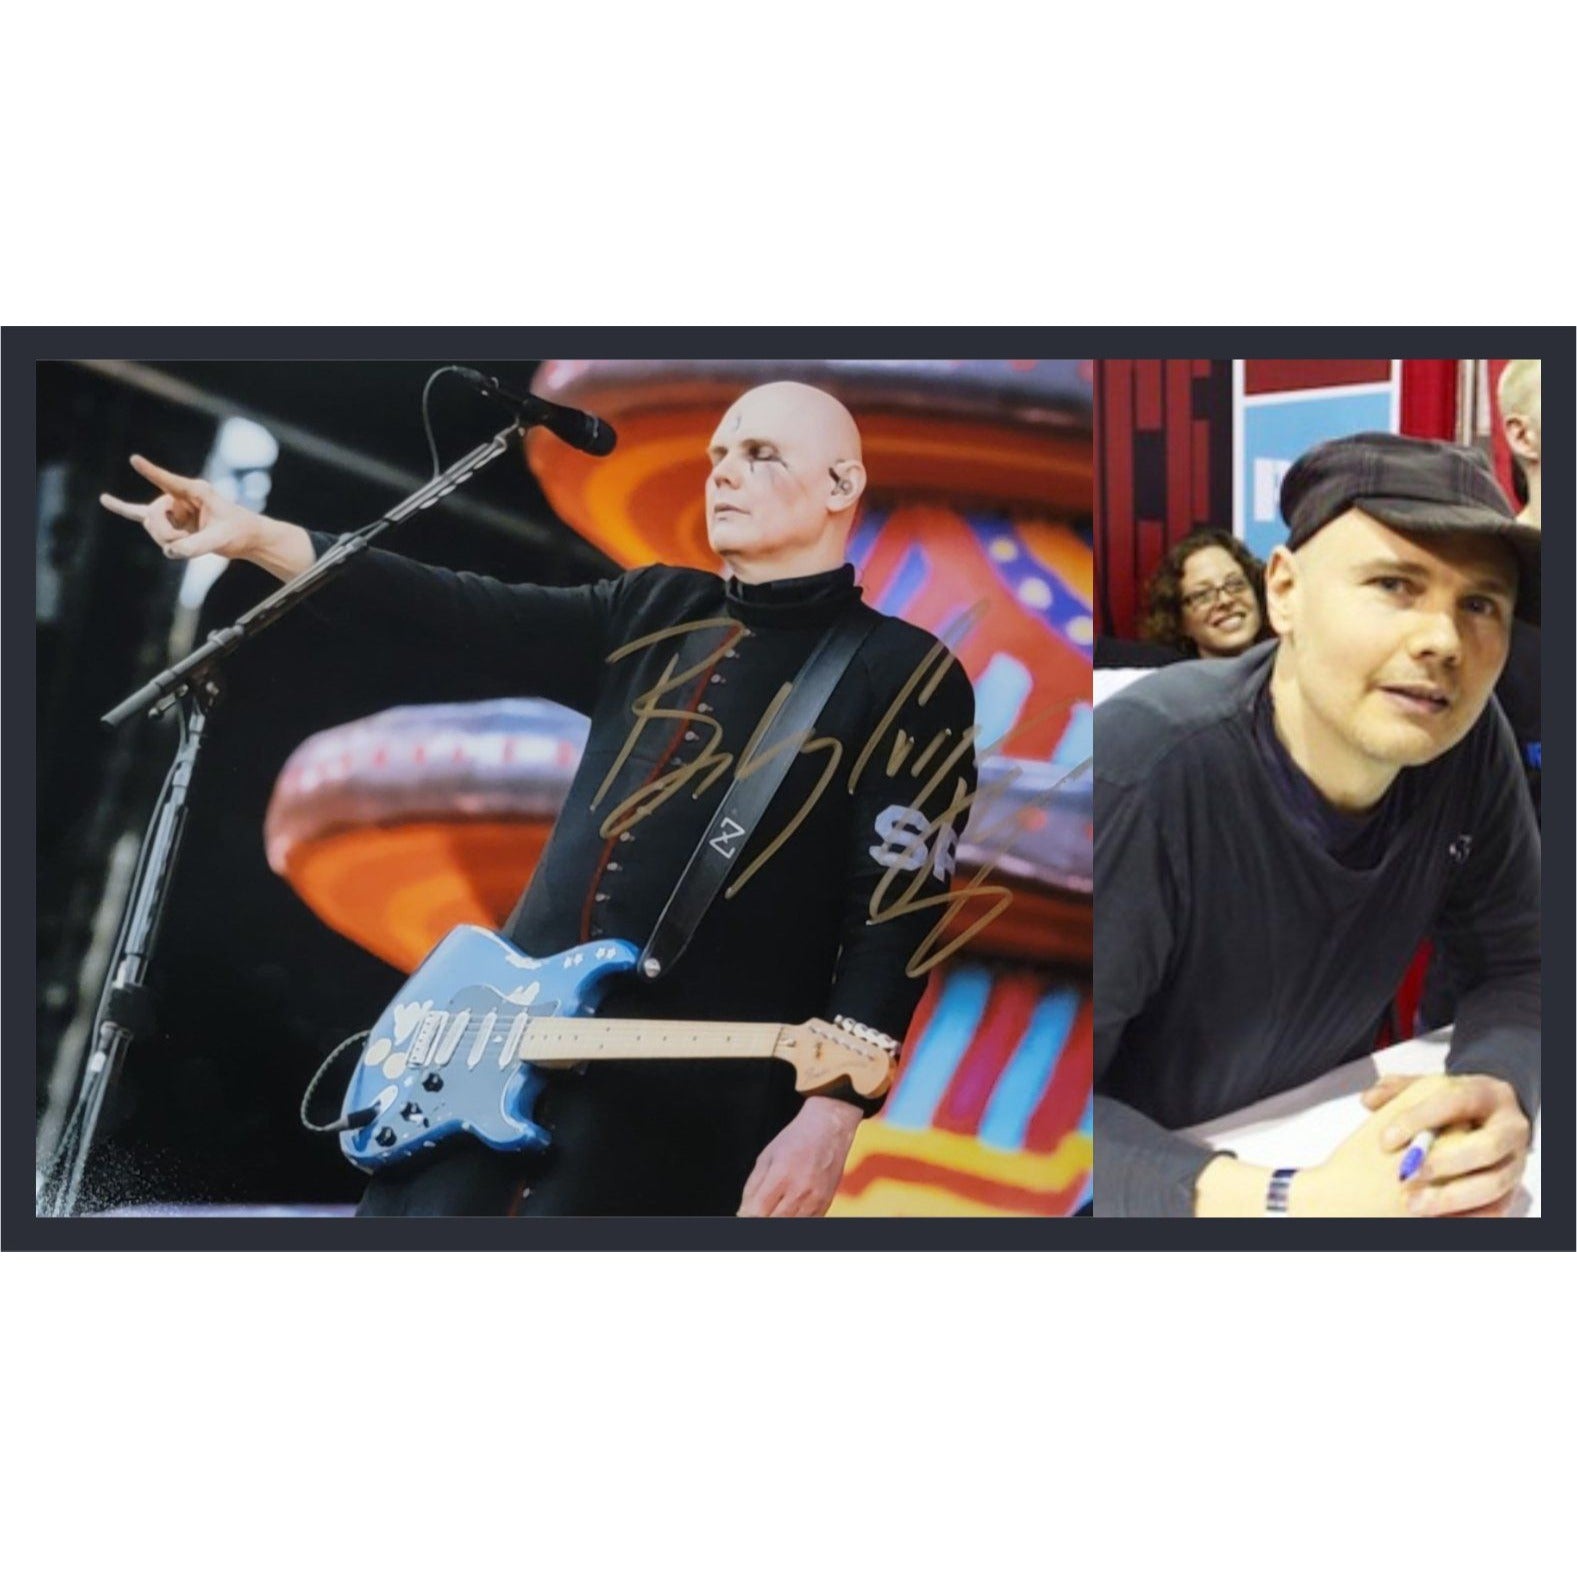 Smashing Pumpkins Billy Corgan 8x10 photo signed with proof